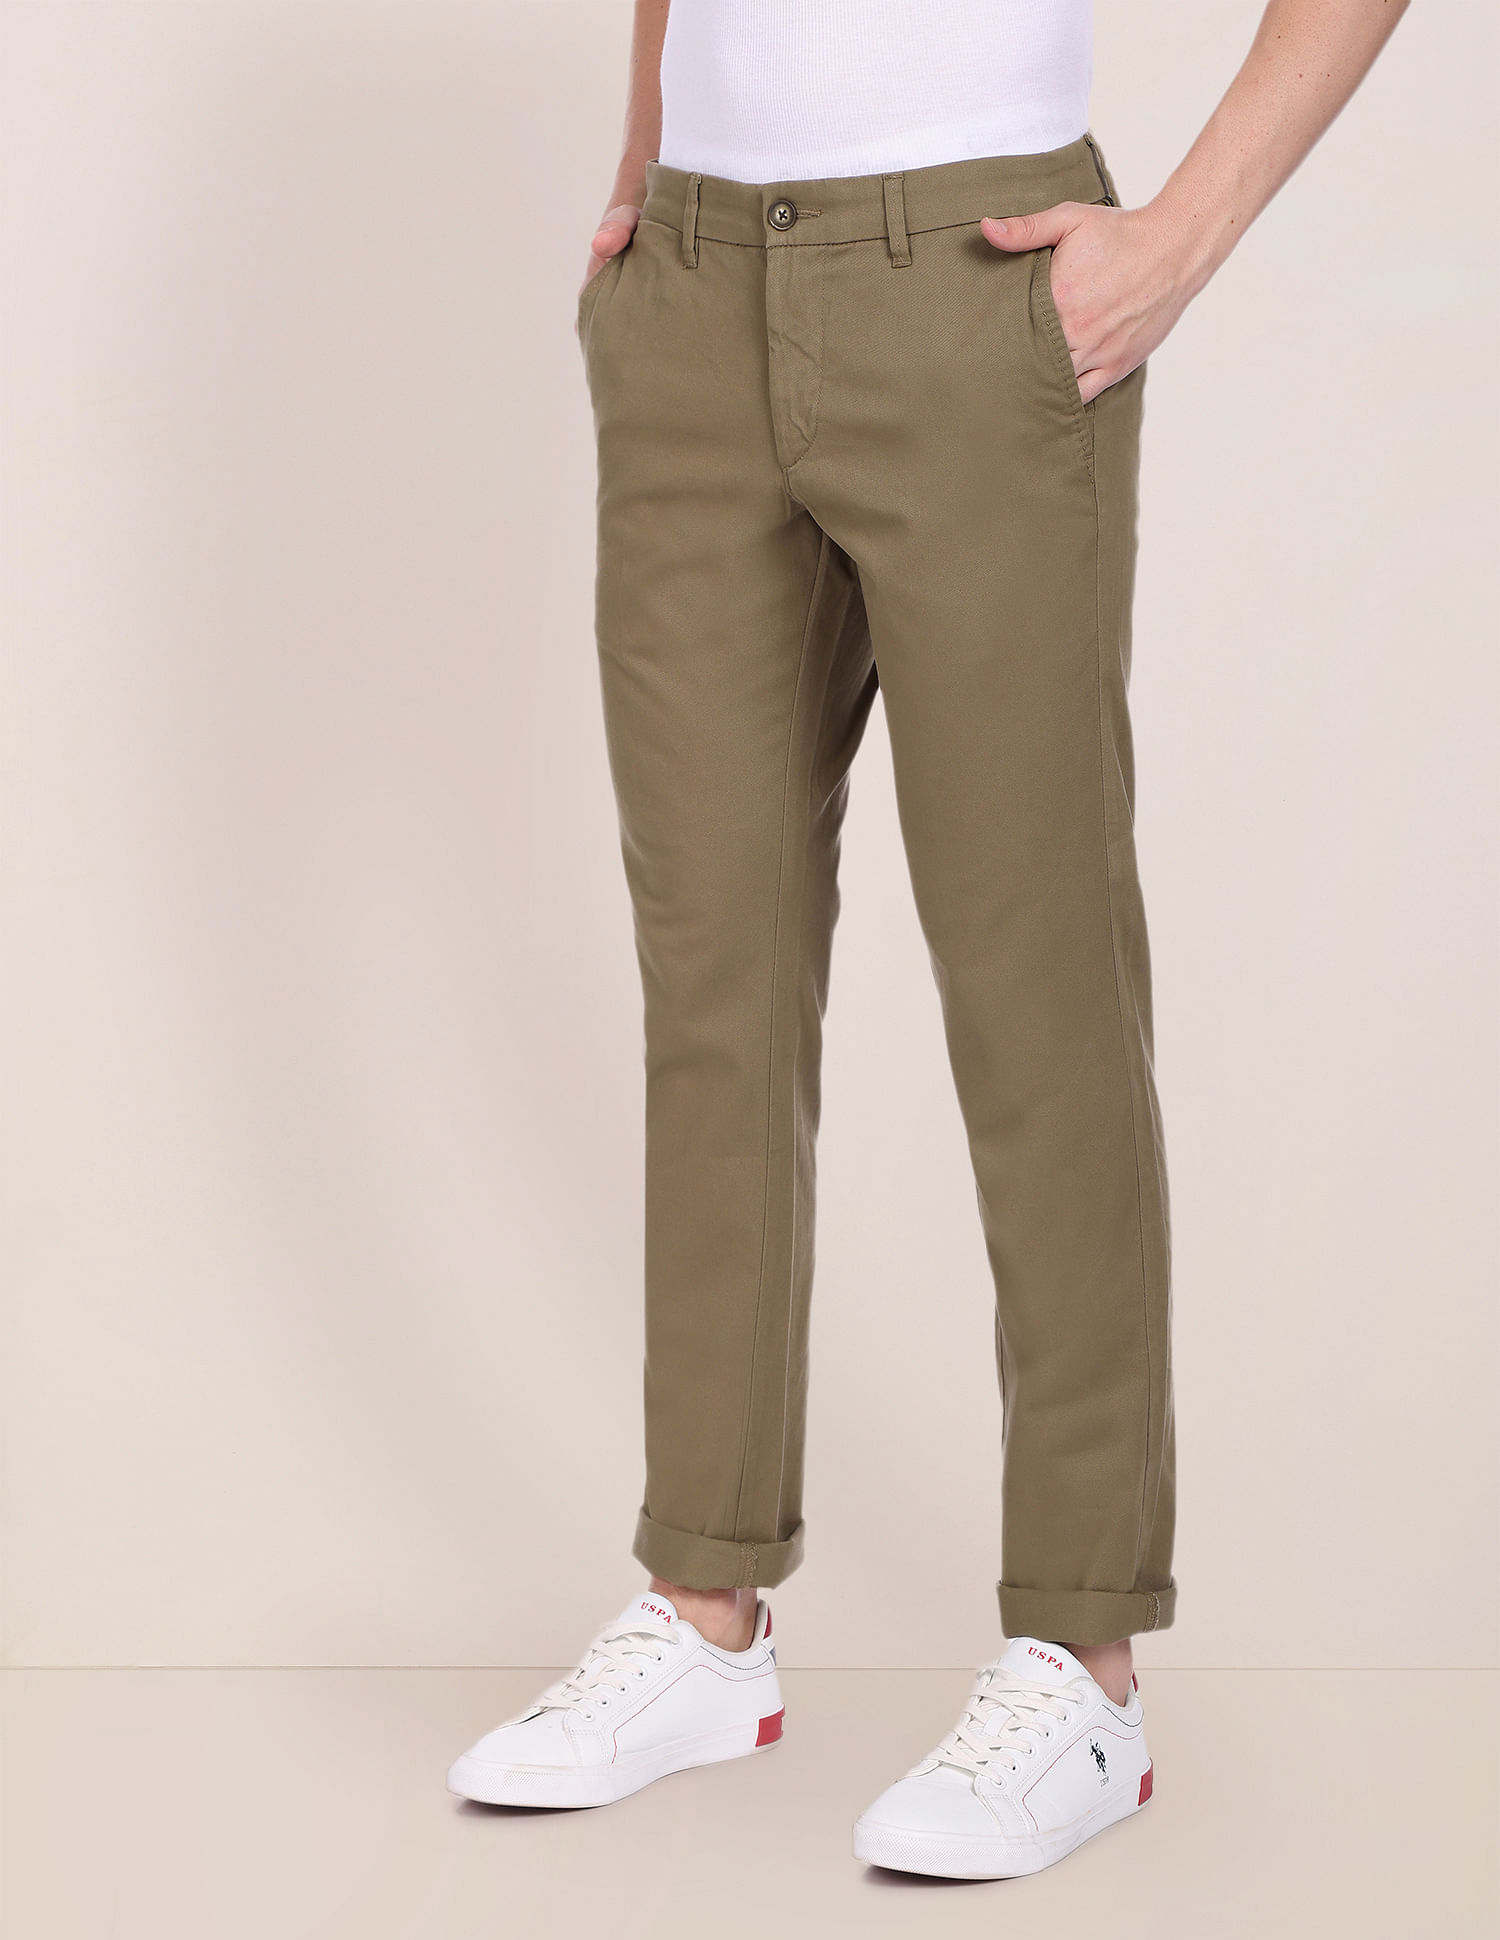 US POLO ASSN Boys Regular Fit Solid Trousers  Blue 45 Years Buy US  POLO ASSN Boys Regular Fit Solid Trousers  Blue 45 Years Online at  Best Price in India  Nykaa